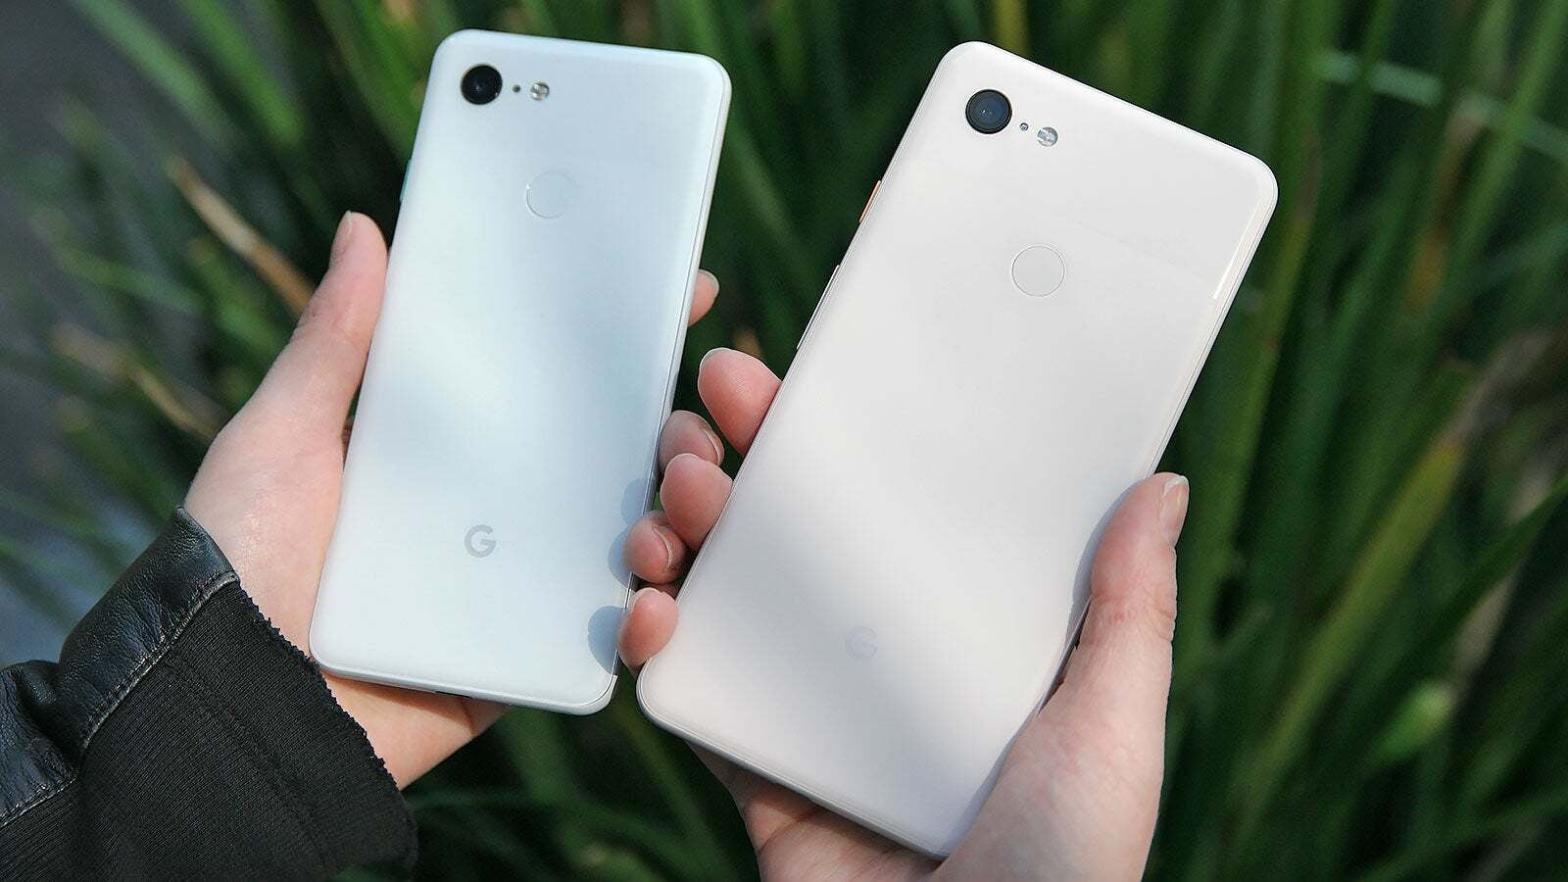 The Pixel 3 and 3 XL are done. (Photo: Sam Rutherford / Gizmodo)